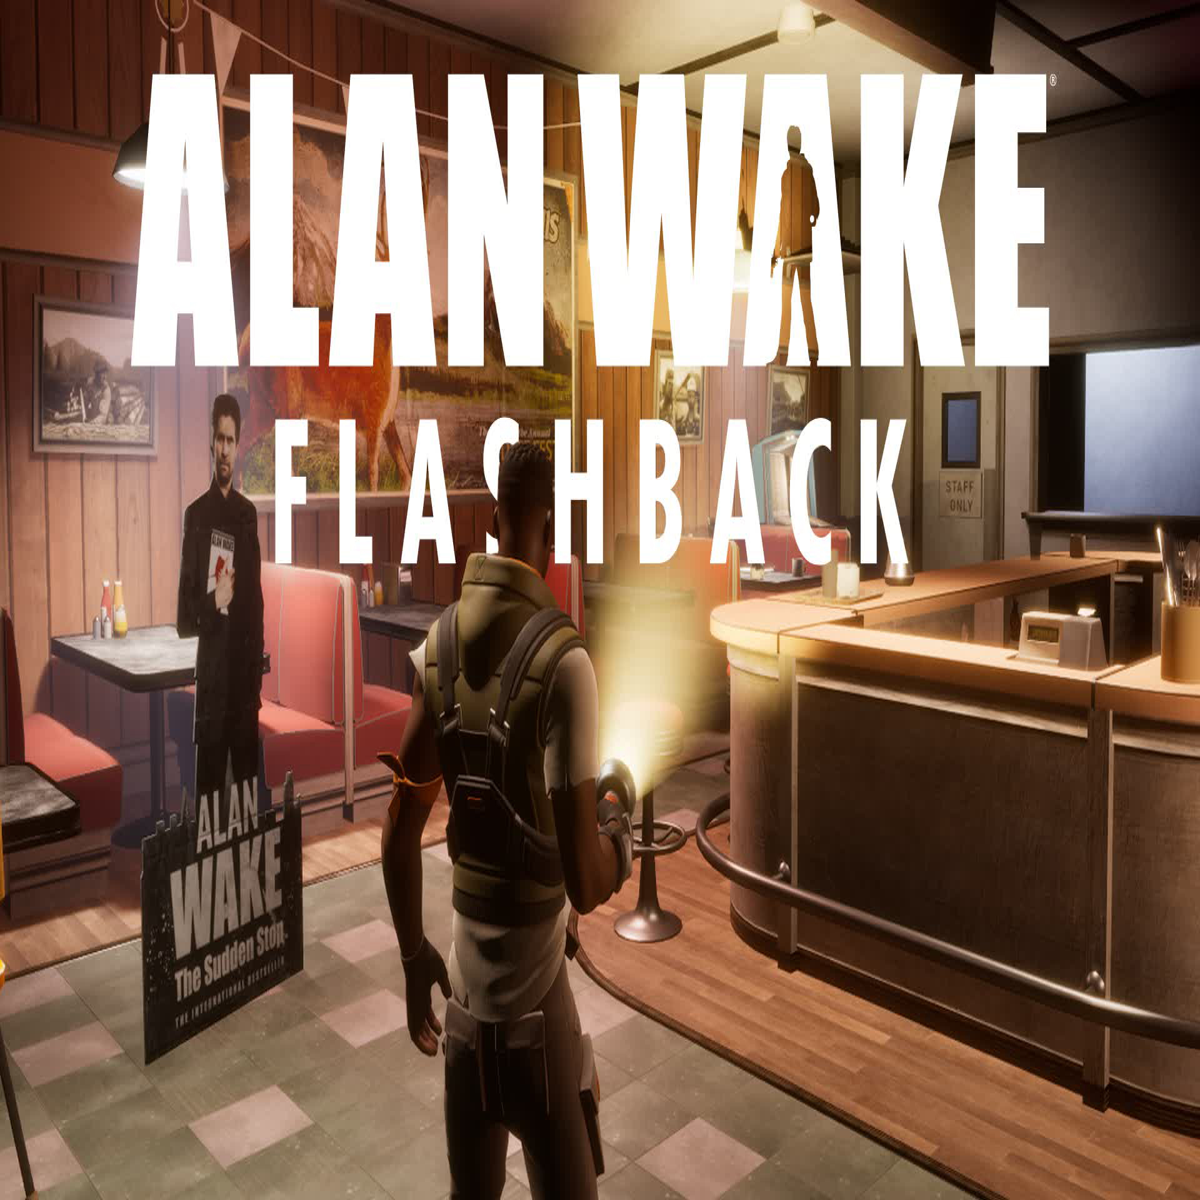 Alan Wake: Flashback is a Fortnite Experience That Recreates